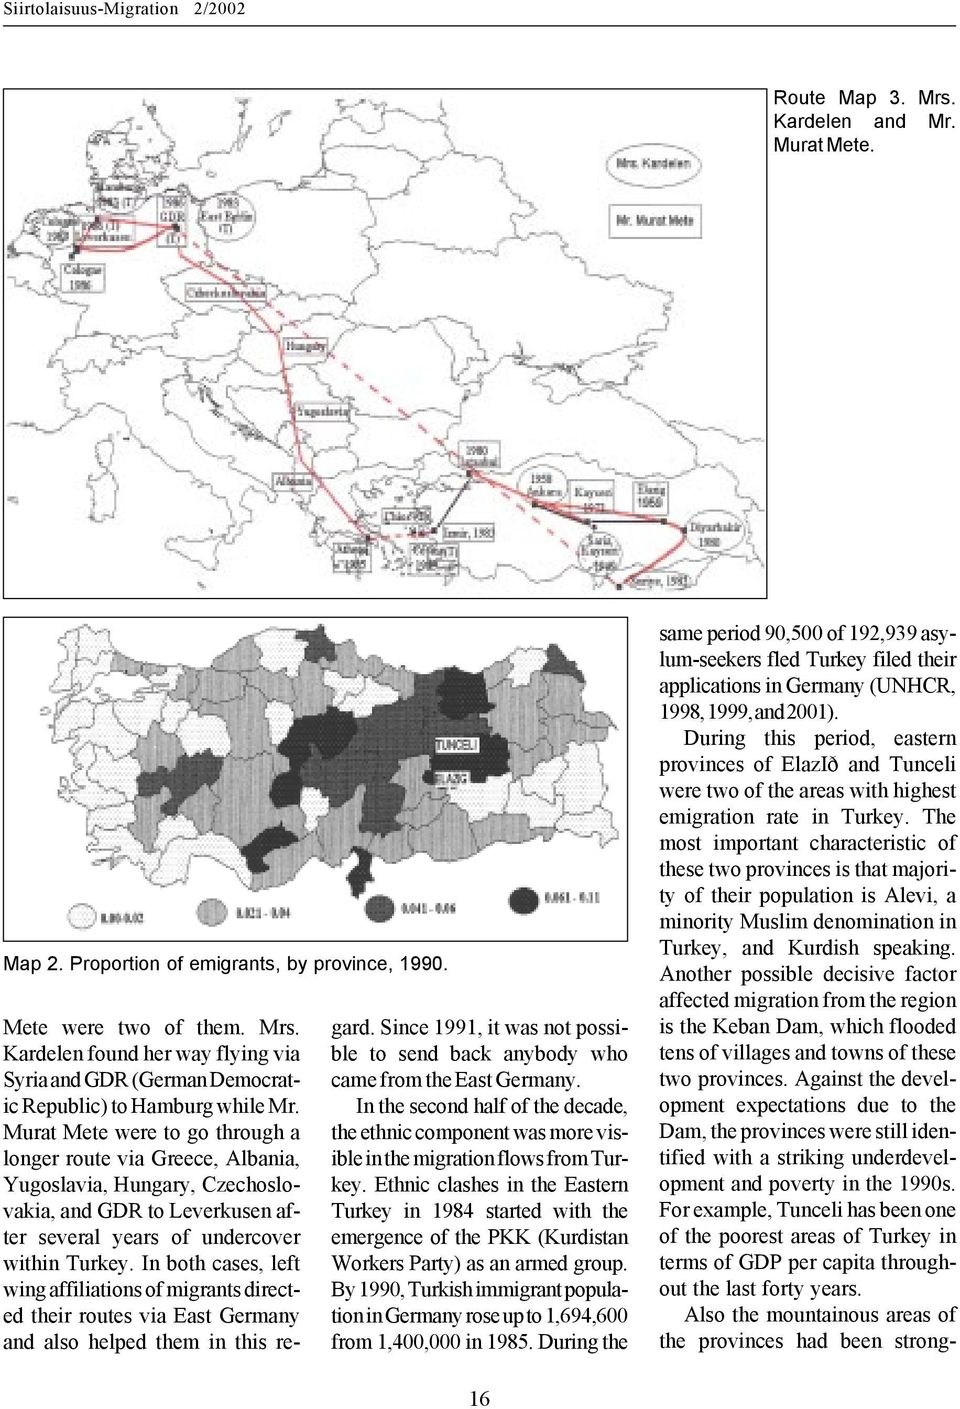 In both cases, left wing affiliations of migrants directed their routes via East Germany and also helped them in this regard.